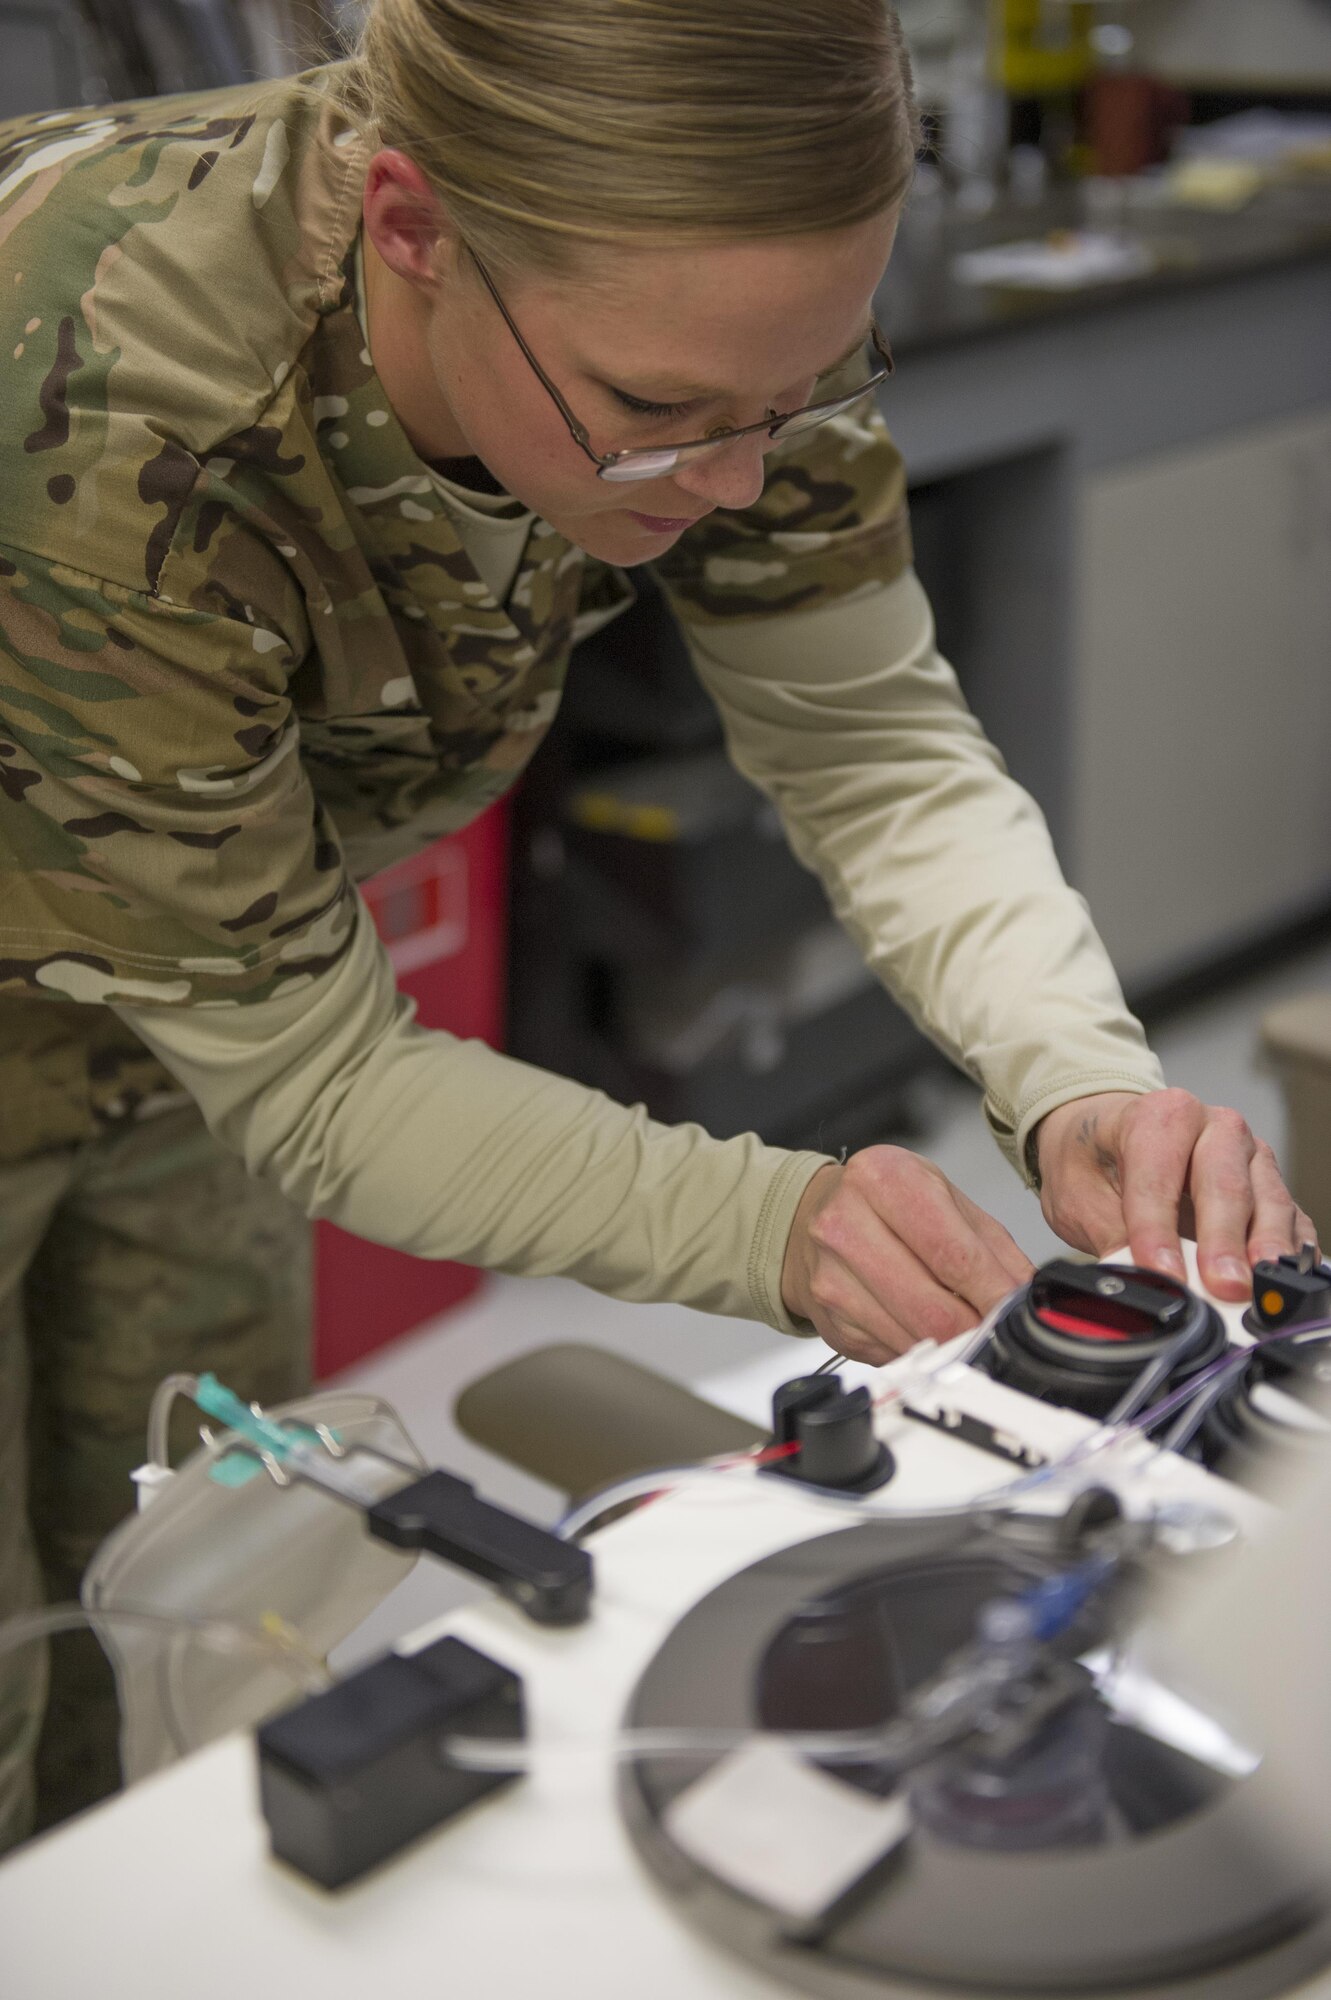 Spc. Lauren O'Neal, 153rd Blood Support Detachment medical laboratory technician, sets up an apheresis machine at Craig Joint Theater Hospital on Bagram Airfield, Afghanistan, Dec. 31, 2015. In order to extract platelets, a critical life-saving blood component, apherisis machines are used to draw blood and return the unused portions to the donor. (U.S. Air Force photo/Tech. Sgt. Robert Cloys)